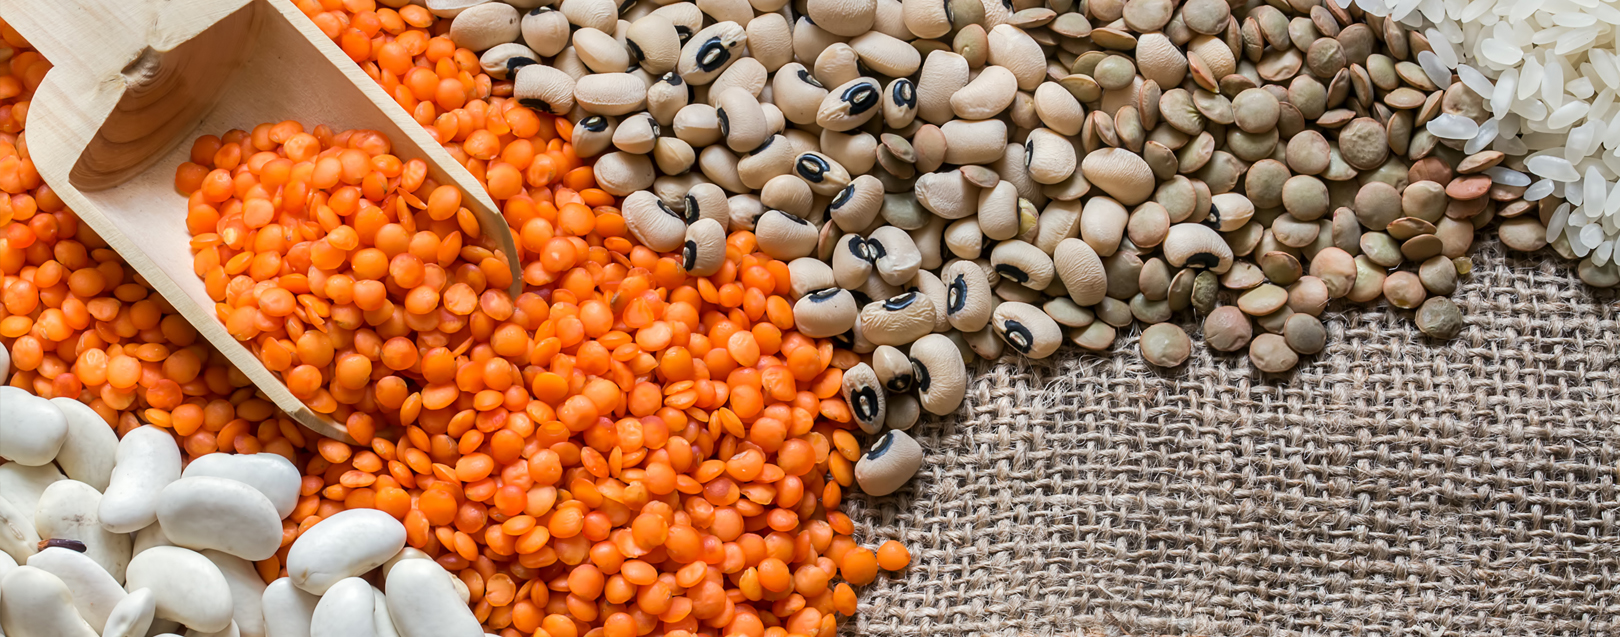 Govt lifts ban on export of all varieties of pulses